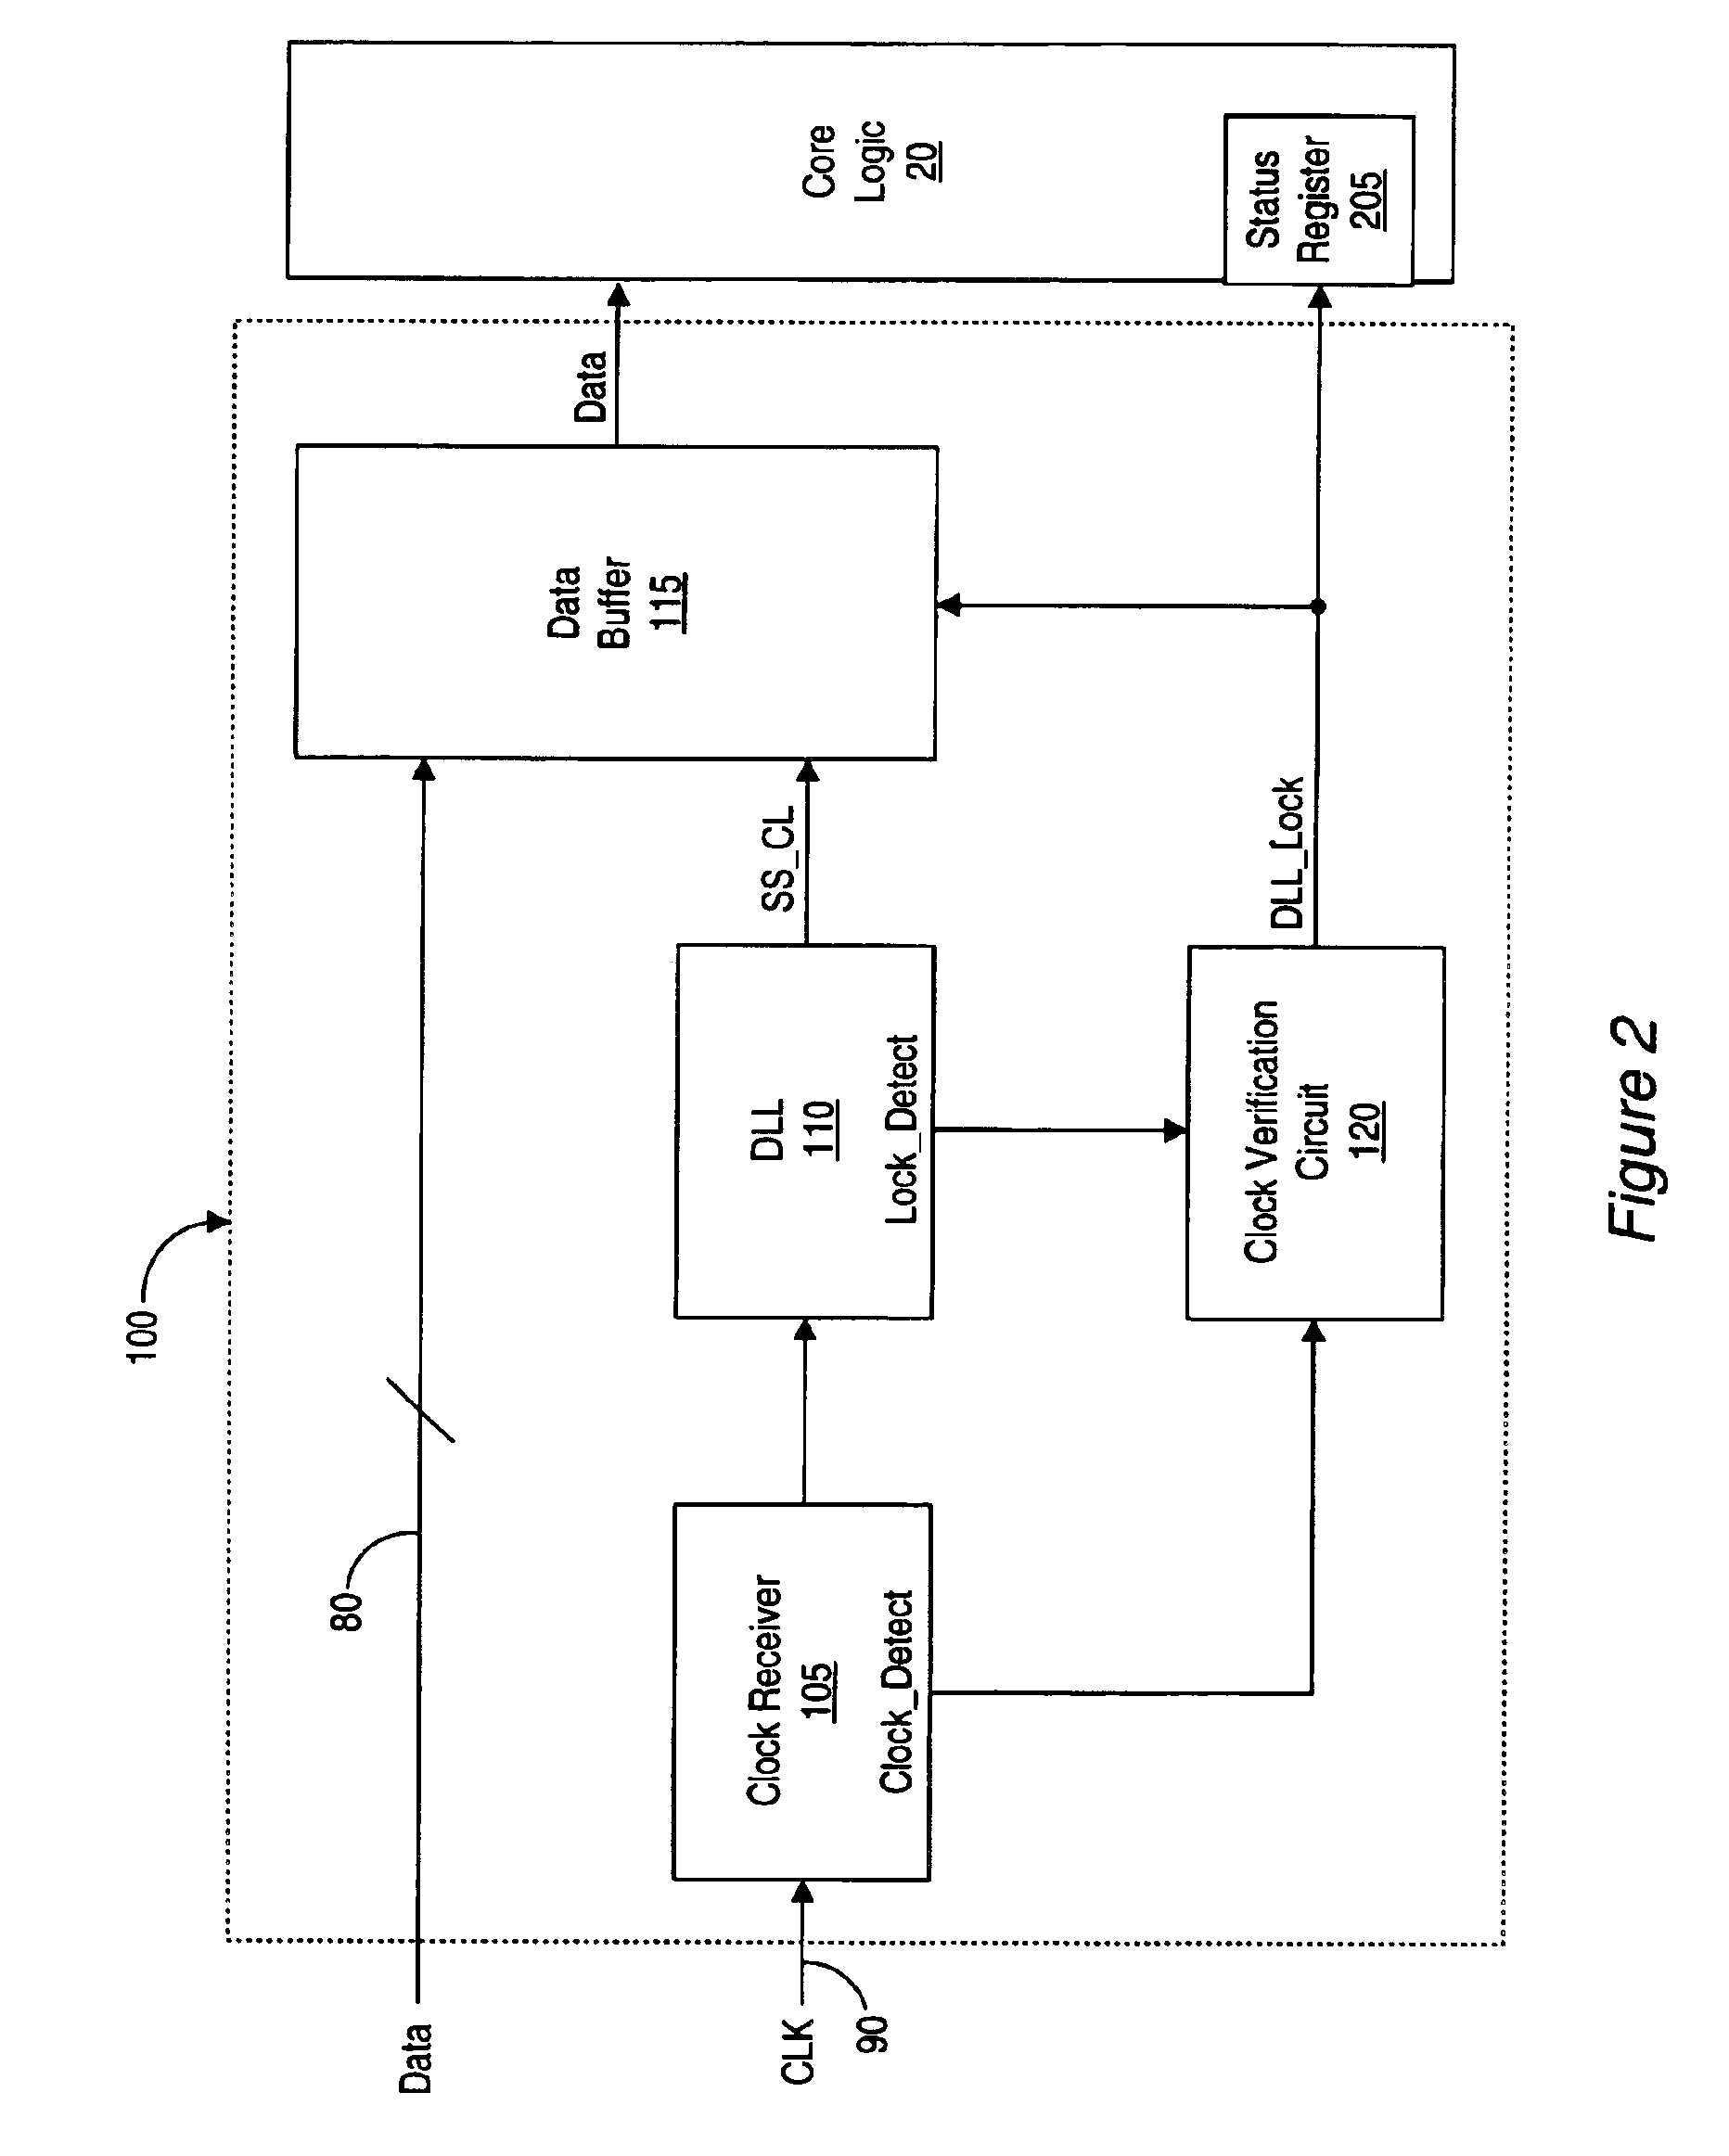 Source synchronous receiver link initialization and input floating control by clock detection and DLL lock detection